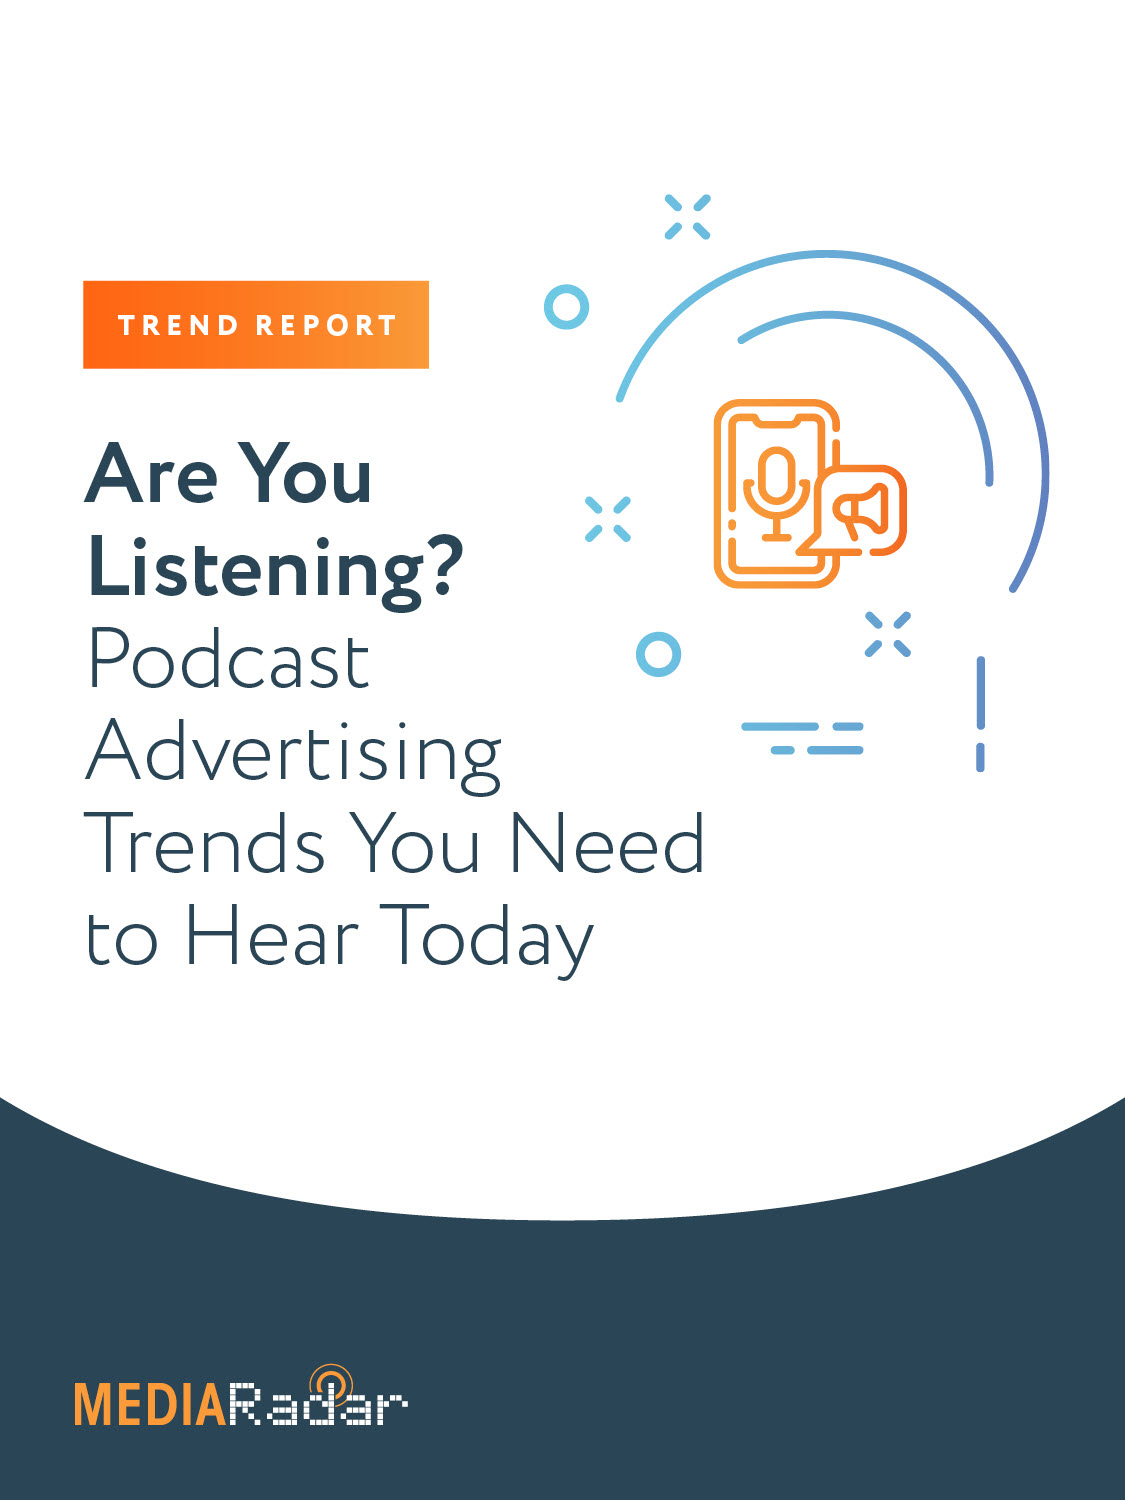 Are You Listening? Podcast Advertising Trends You Need to Hear Today